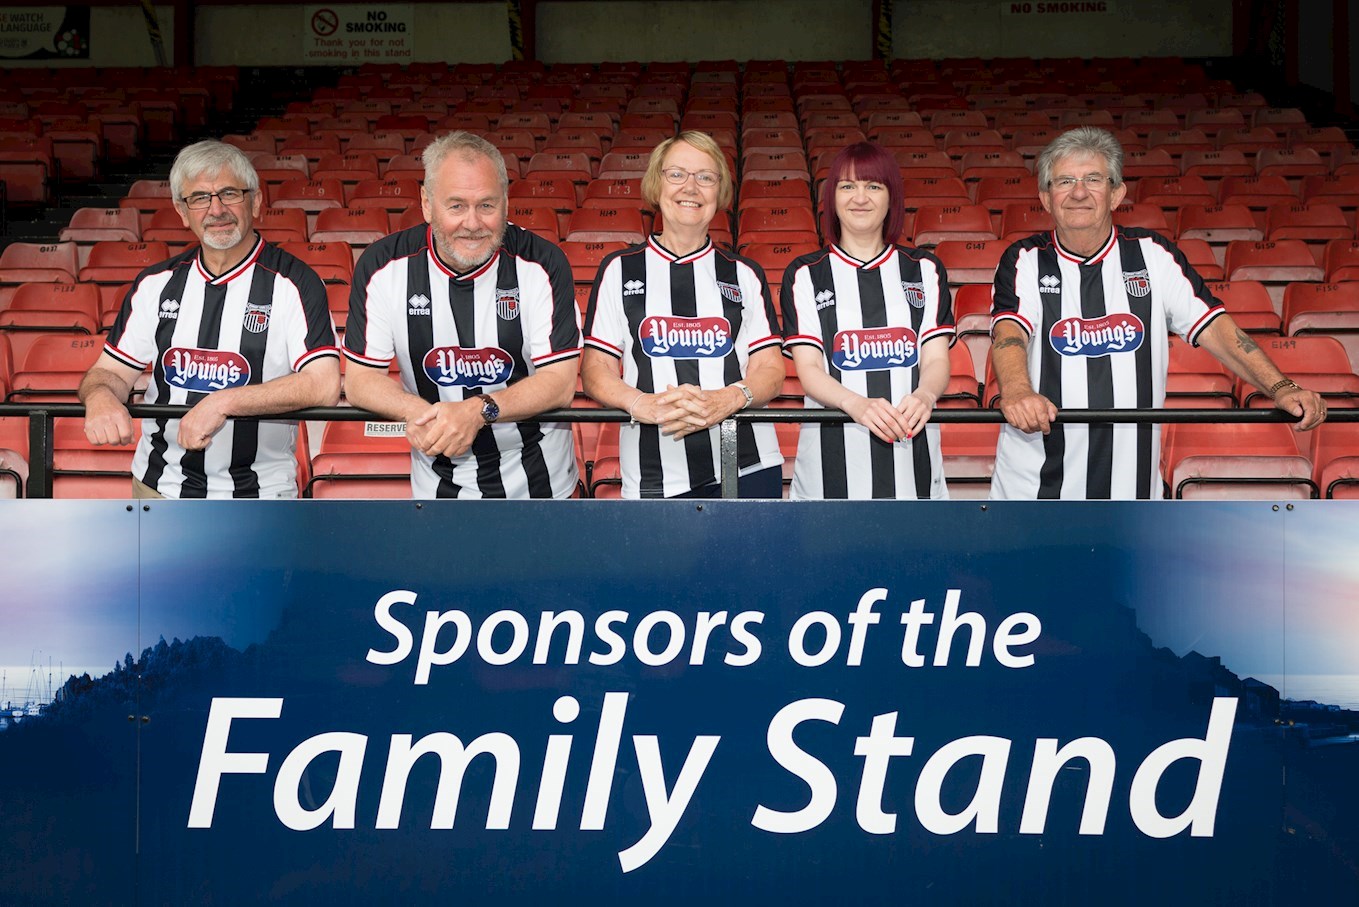 GTFC fans with new kit